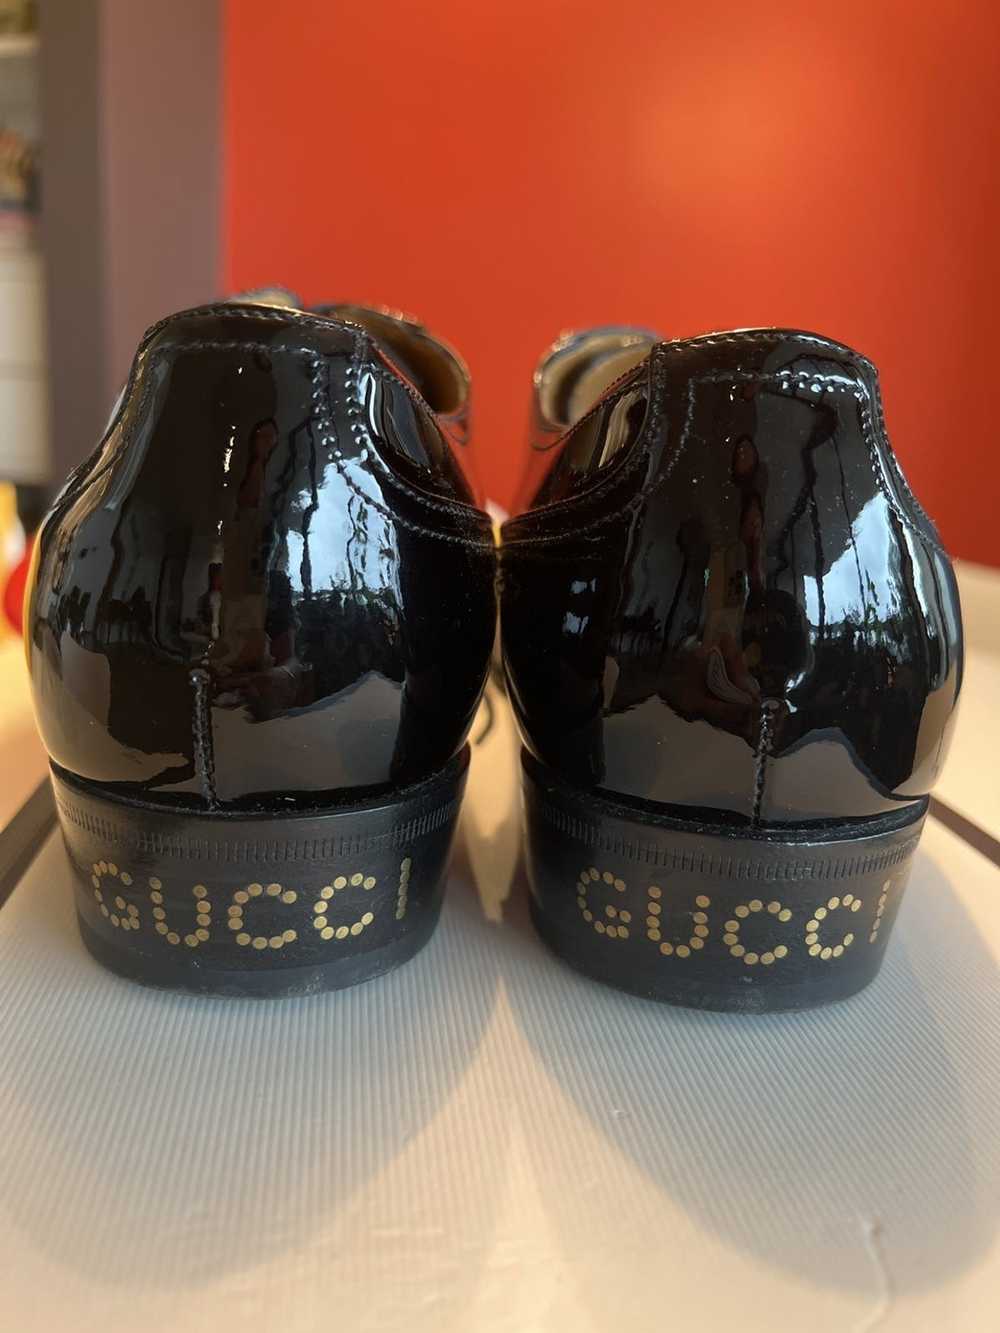 Gucci Gucci vernice Crystal black shoes - image 6